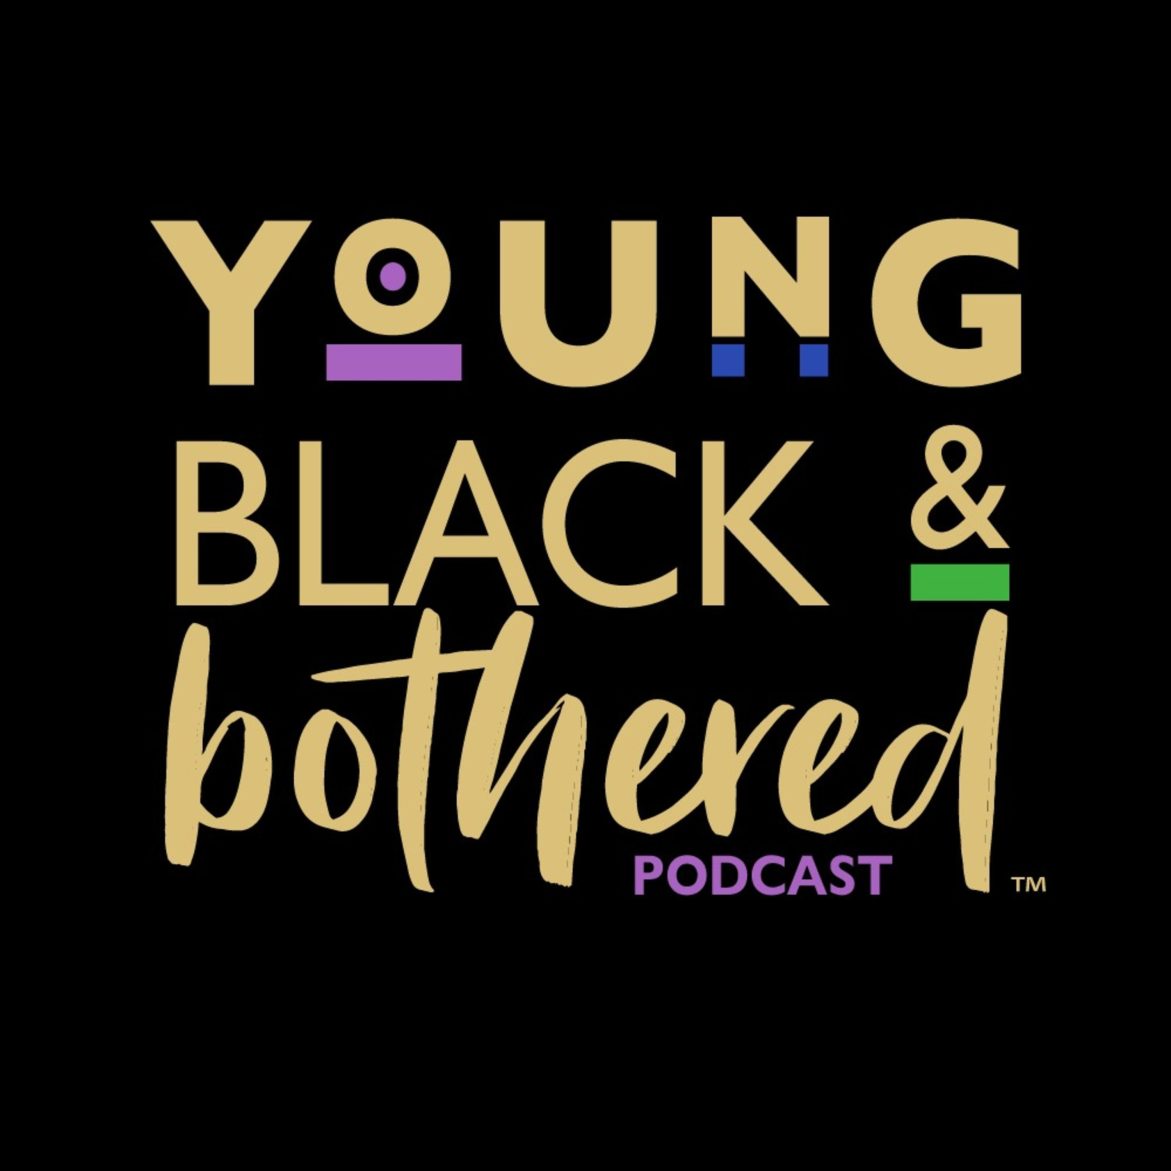 Black Podcasting - 31: Witchcraft & Woes